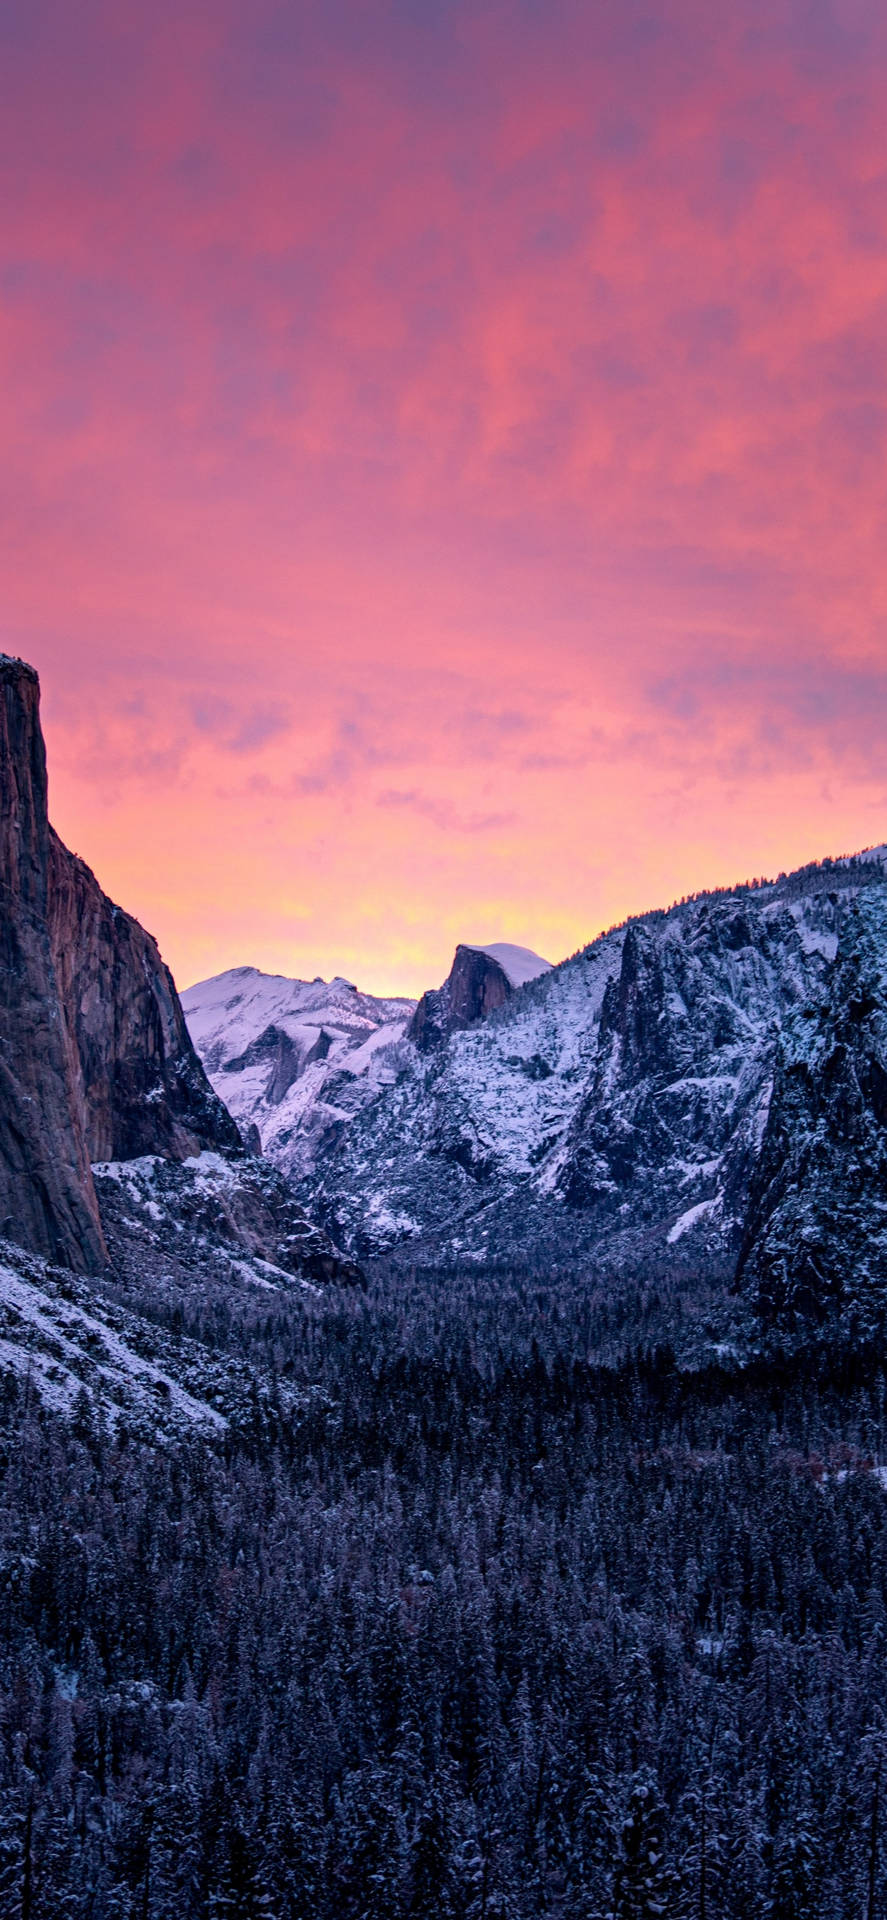 Explore the beauty of Yosemite National Park with your new iPhone Wallpaper